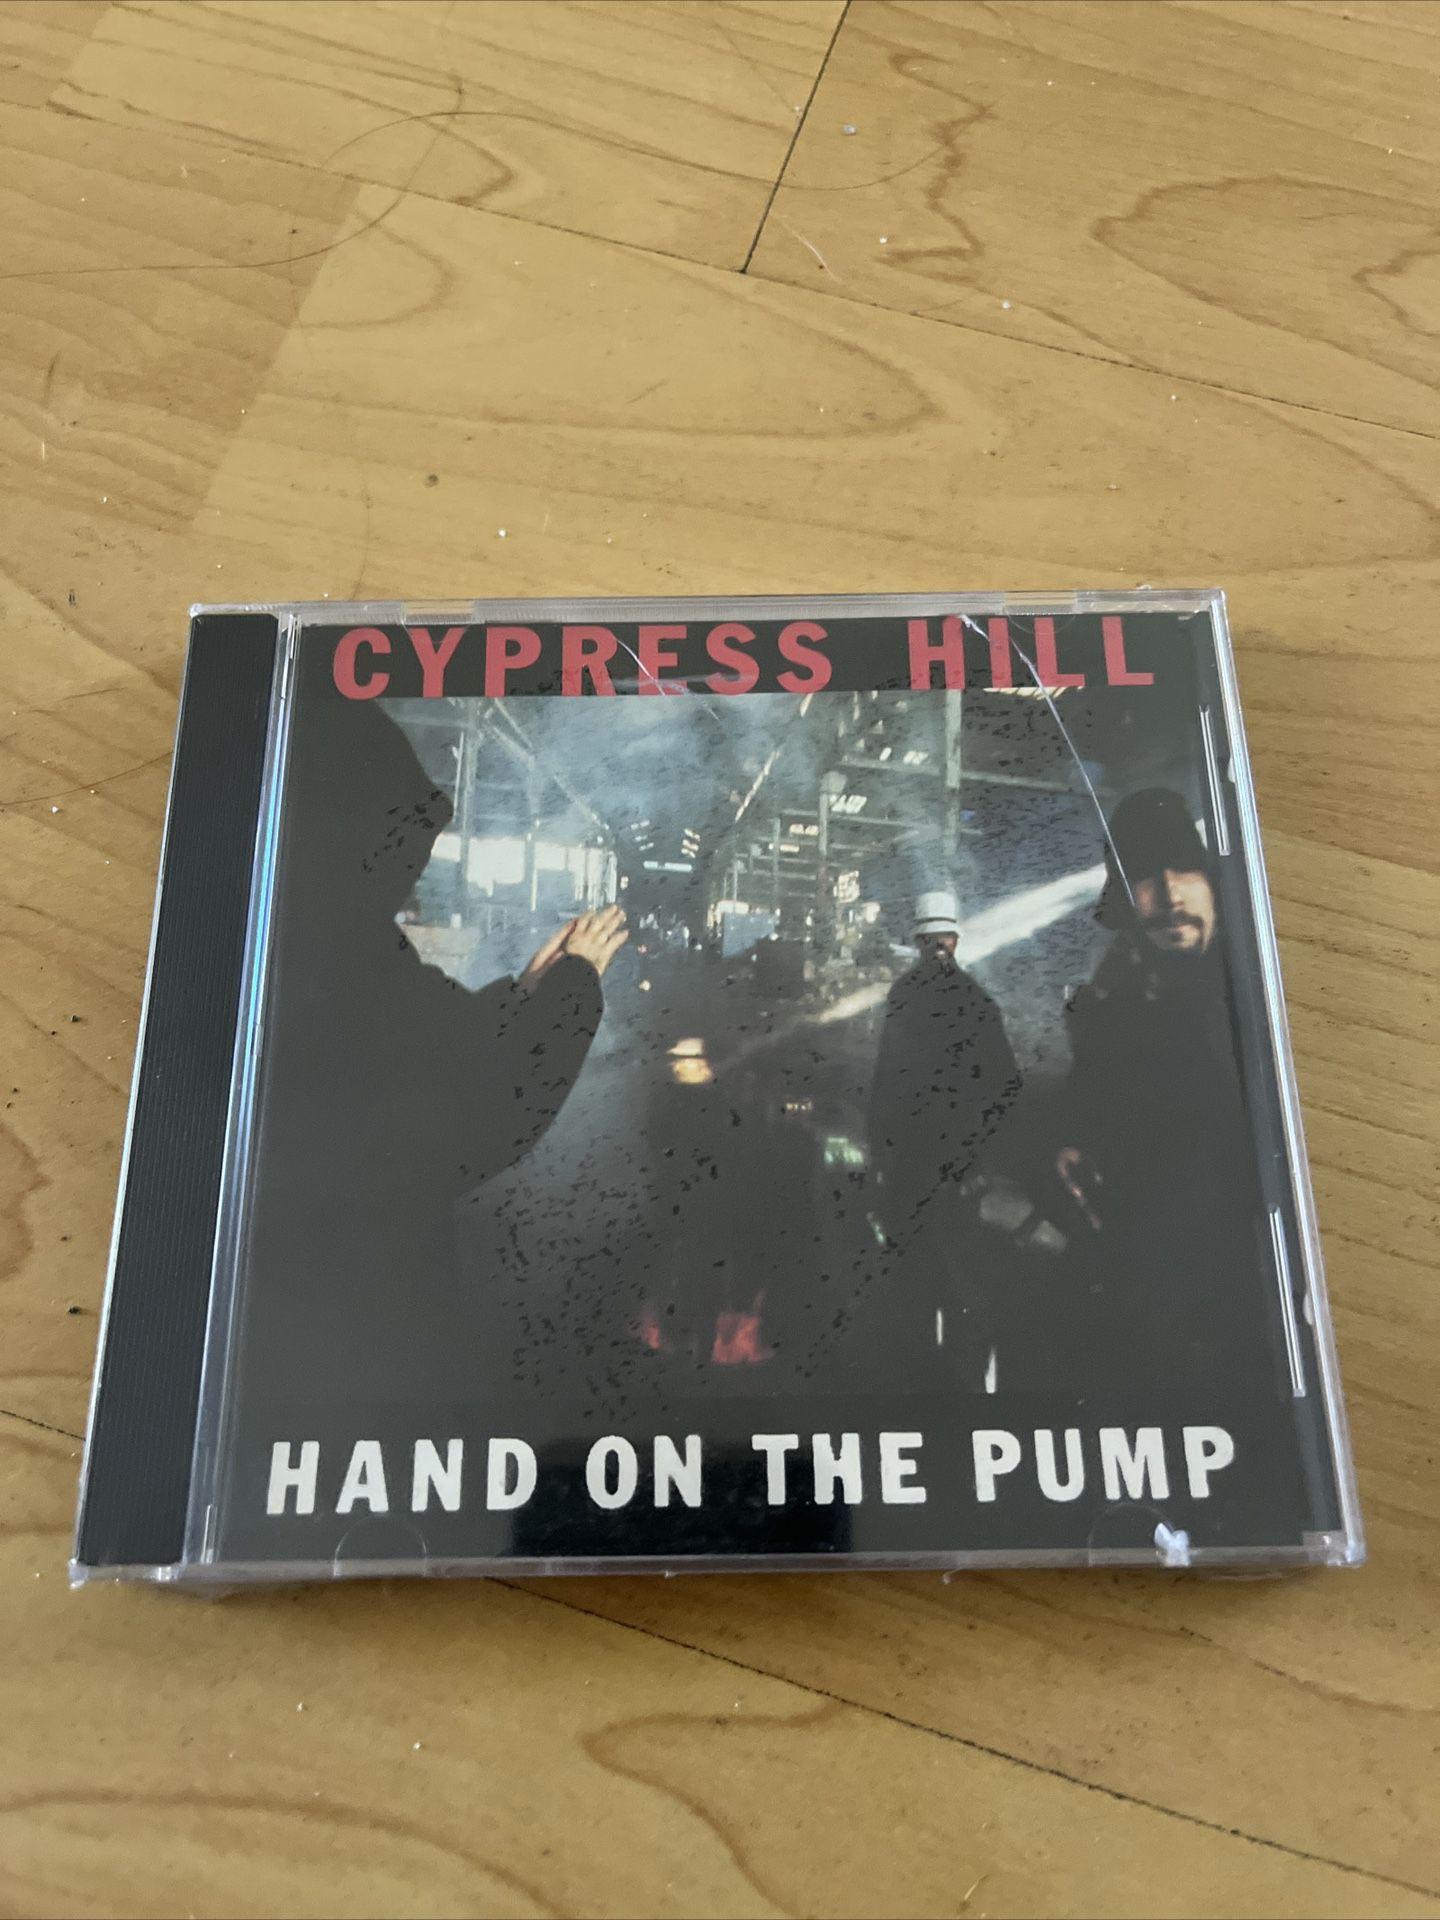 Cypress Hill  Hand On The Pump Single Cd New Sealed 